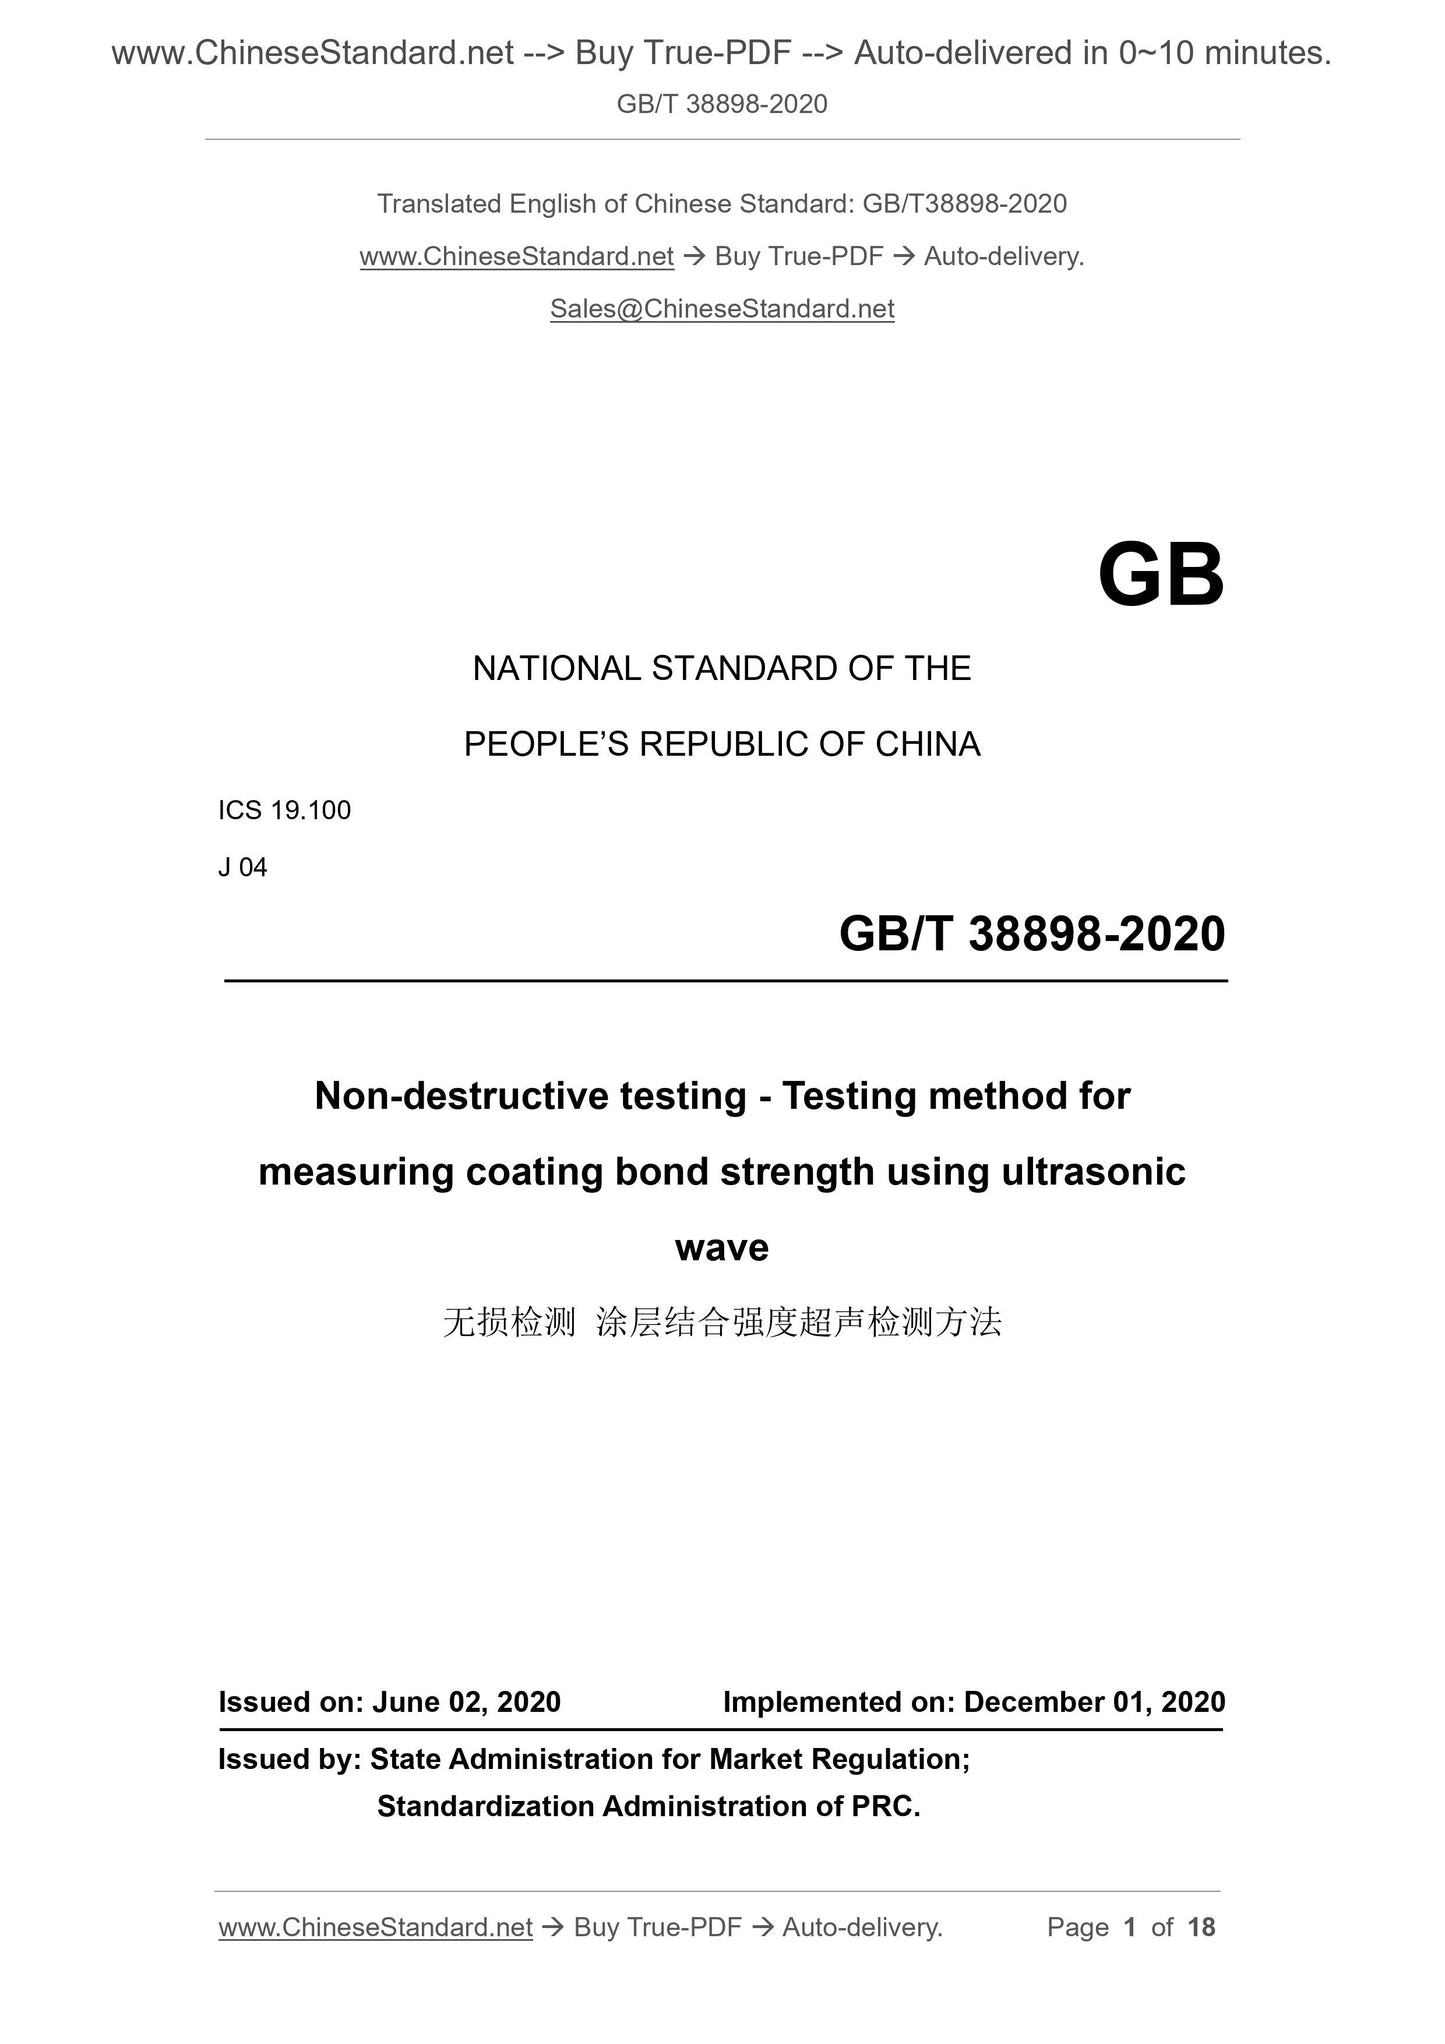 GB/T 38898-2020 Page 1